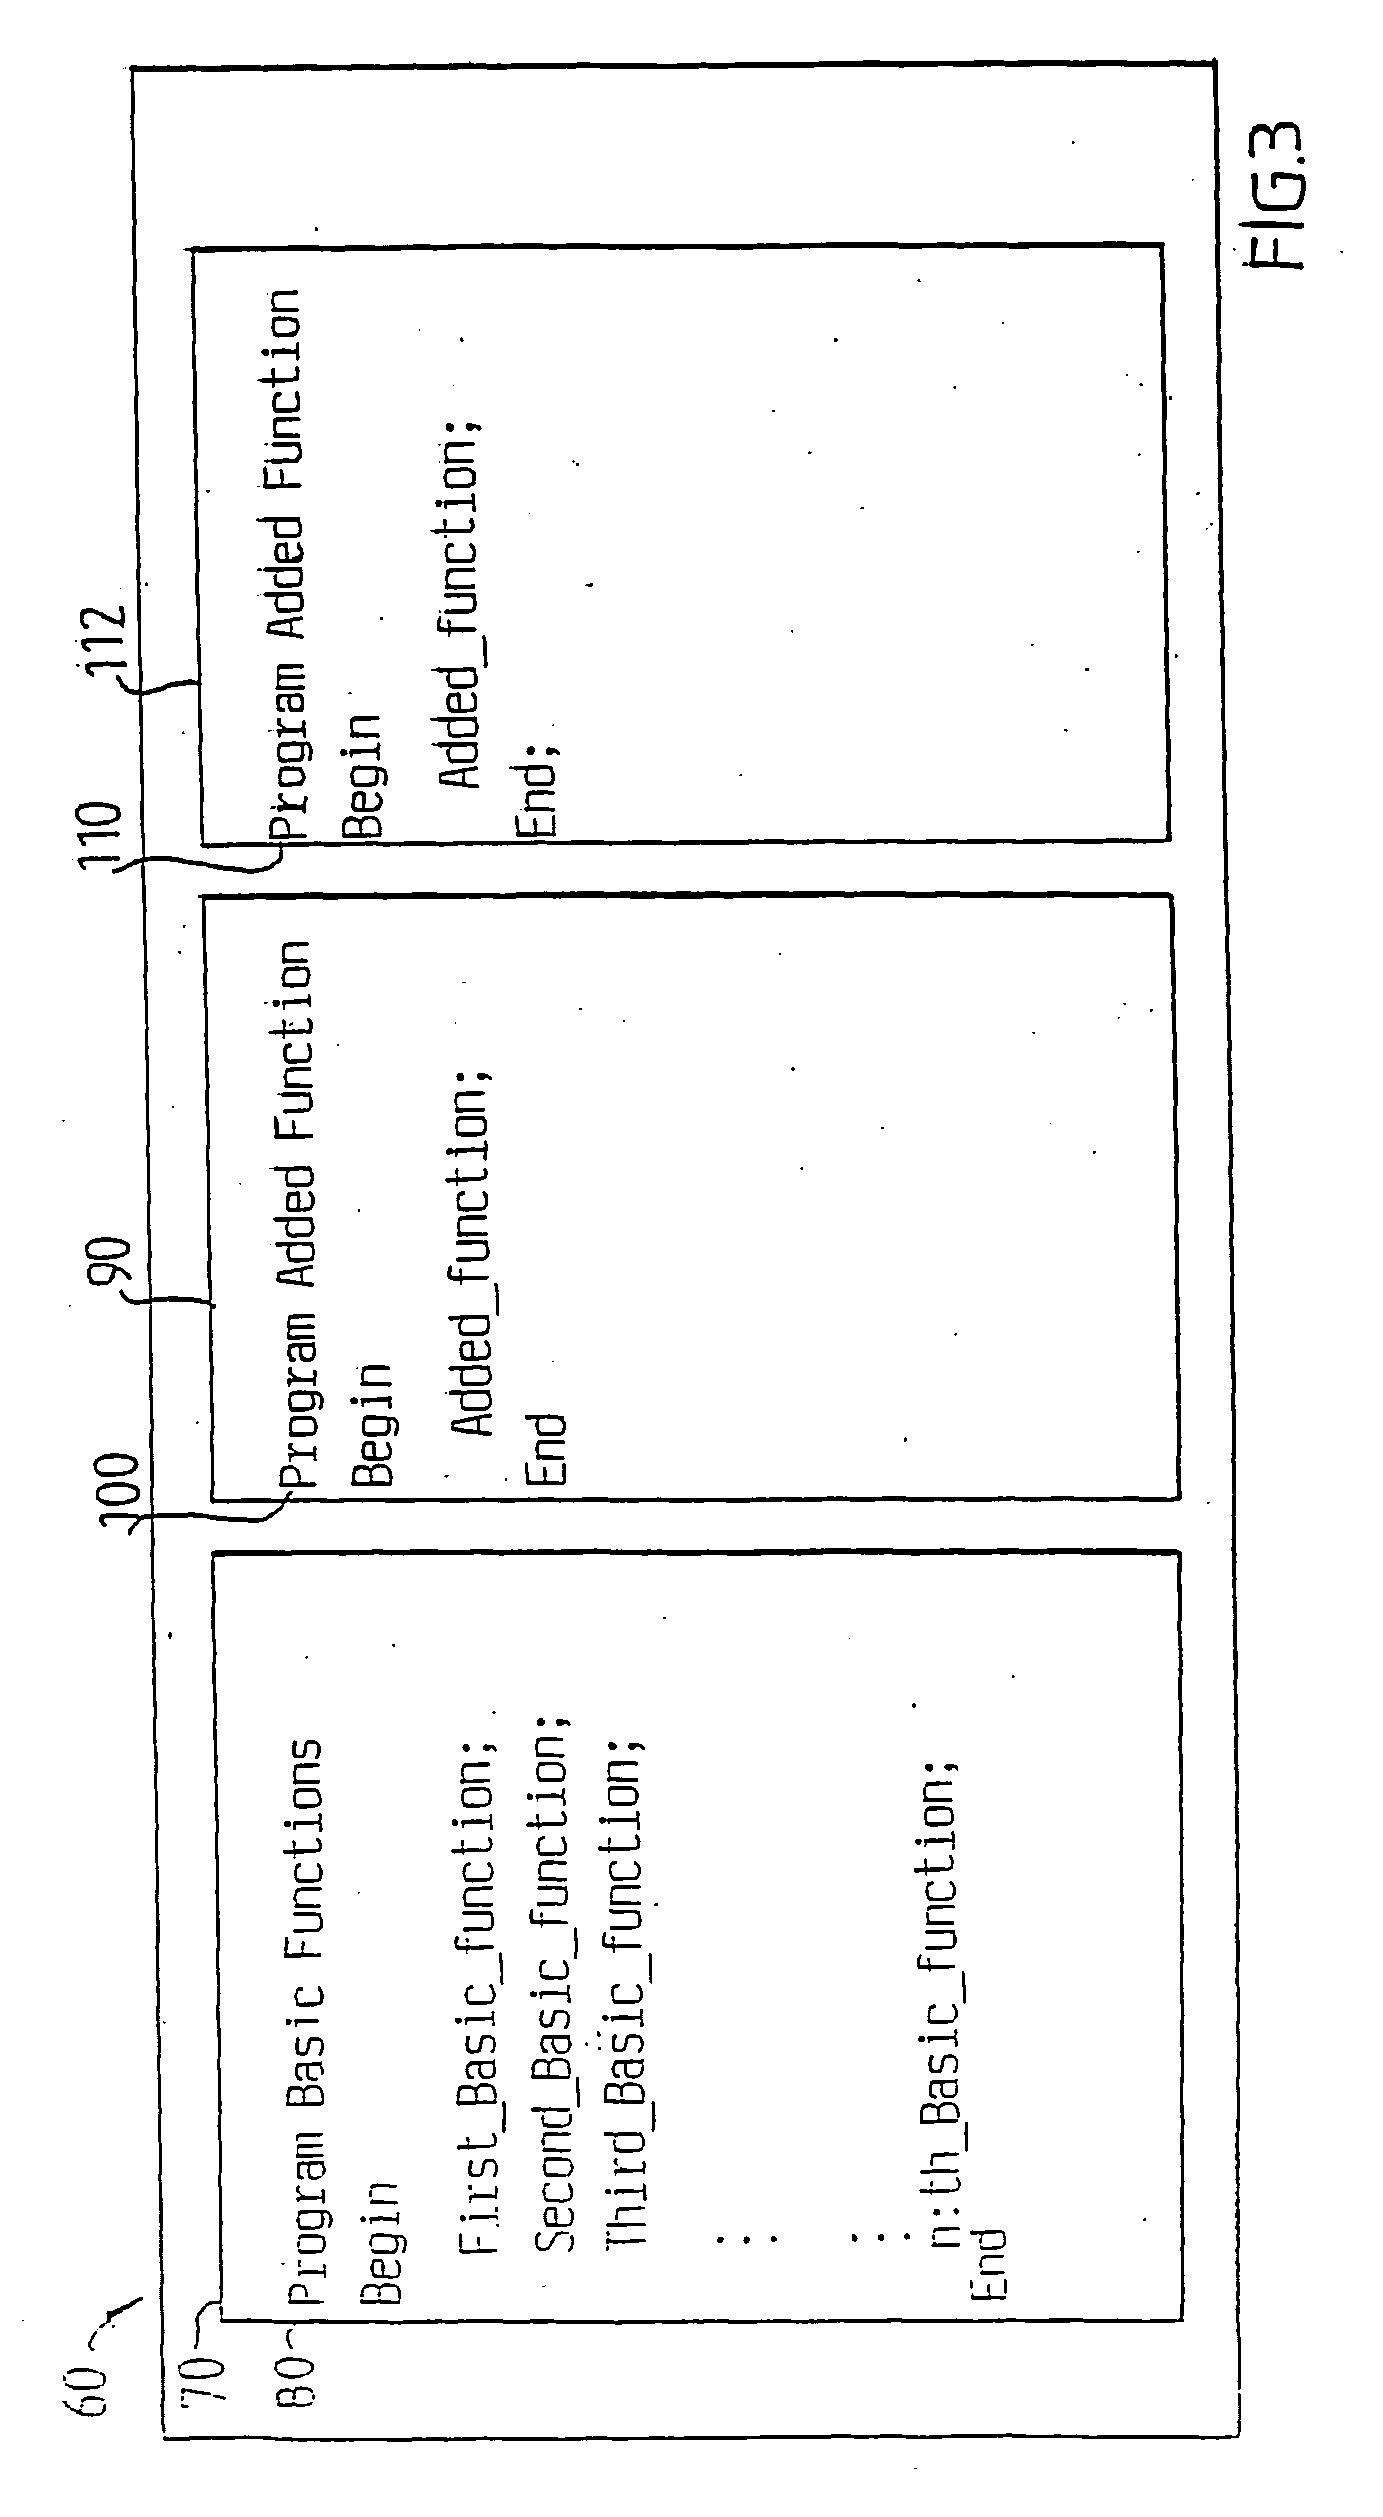 Analysis system for analysing the condition of a machine